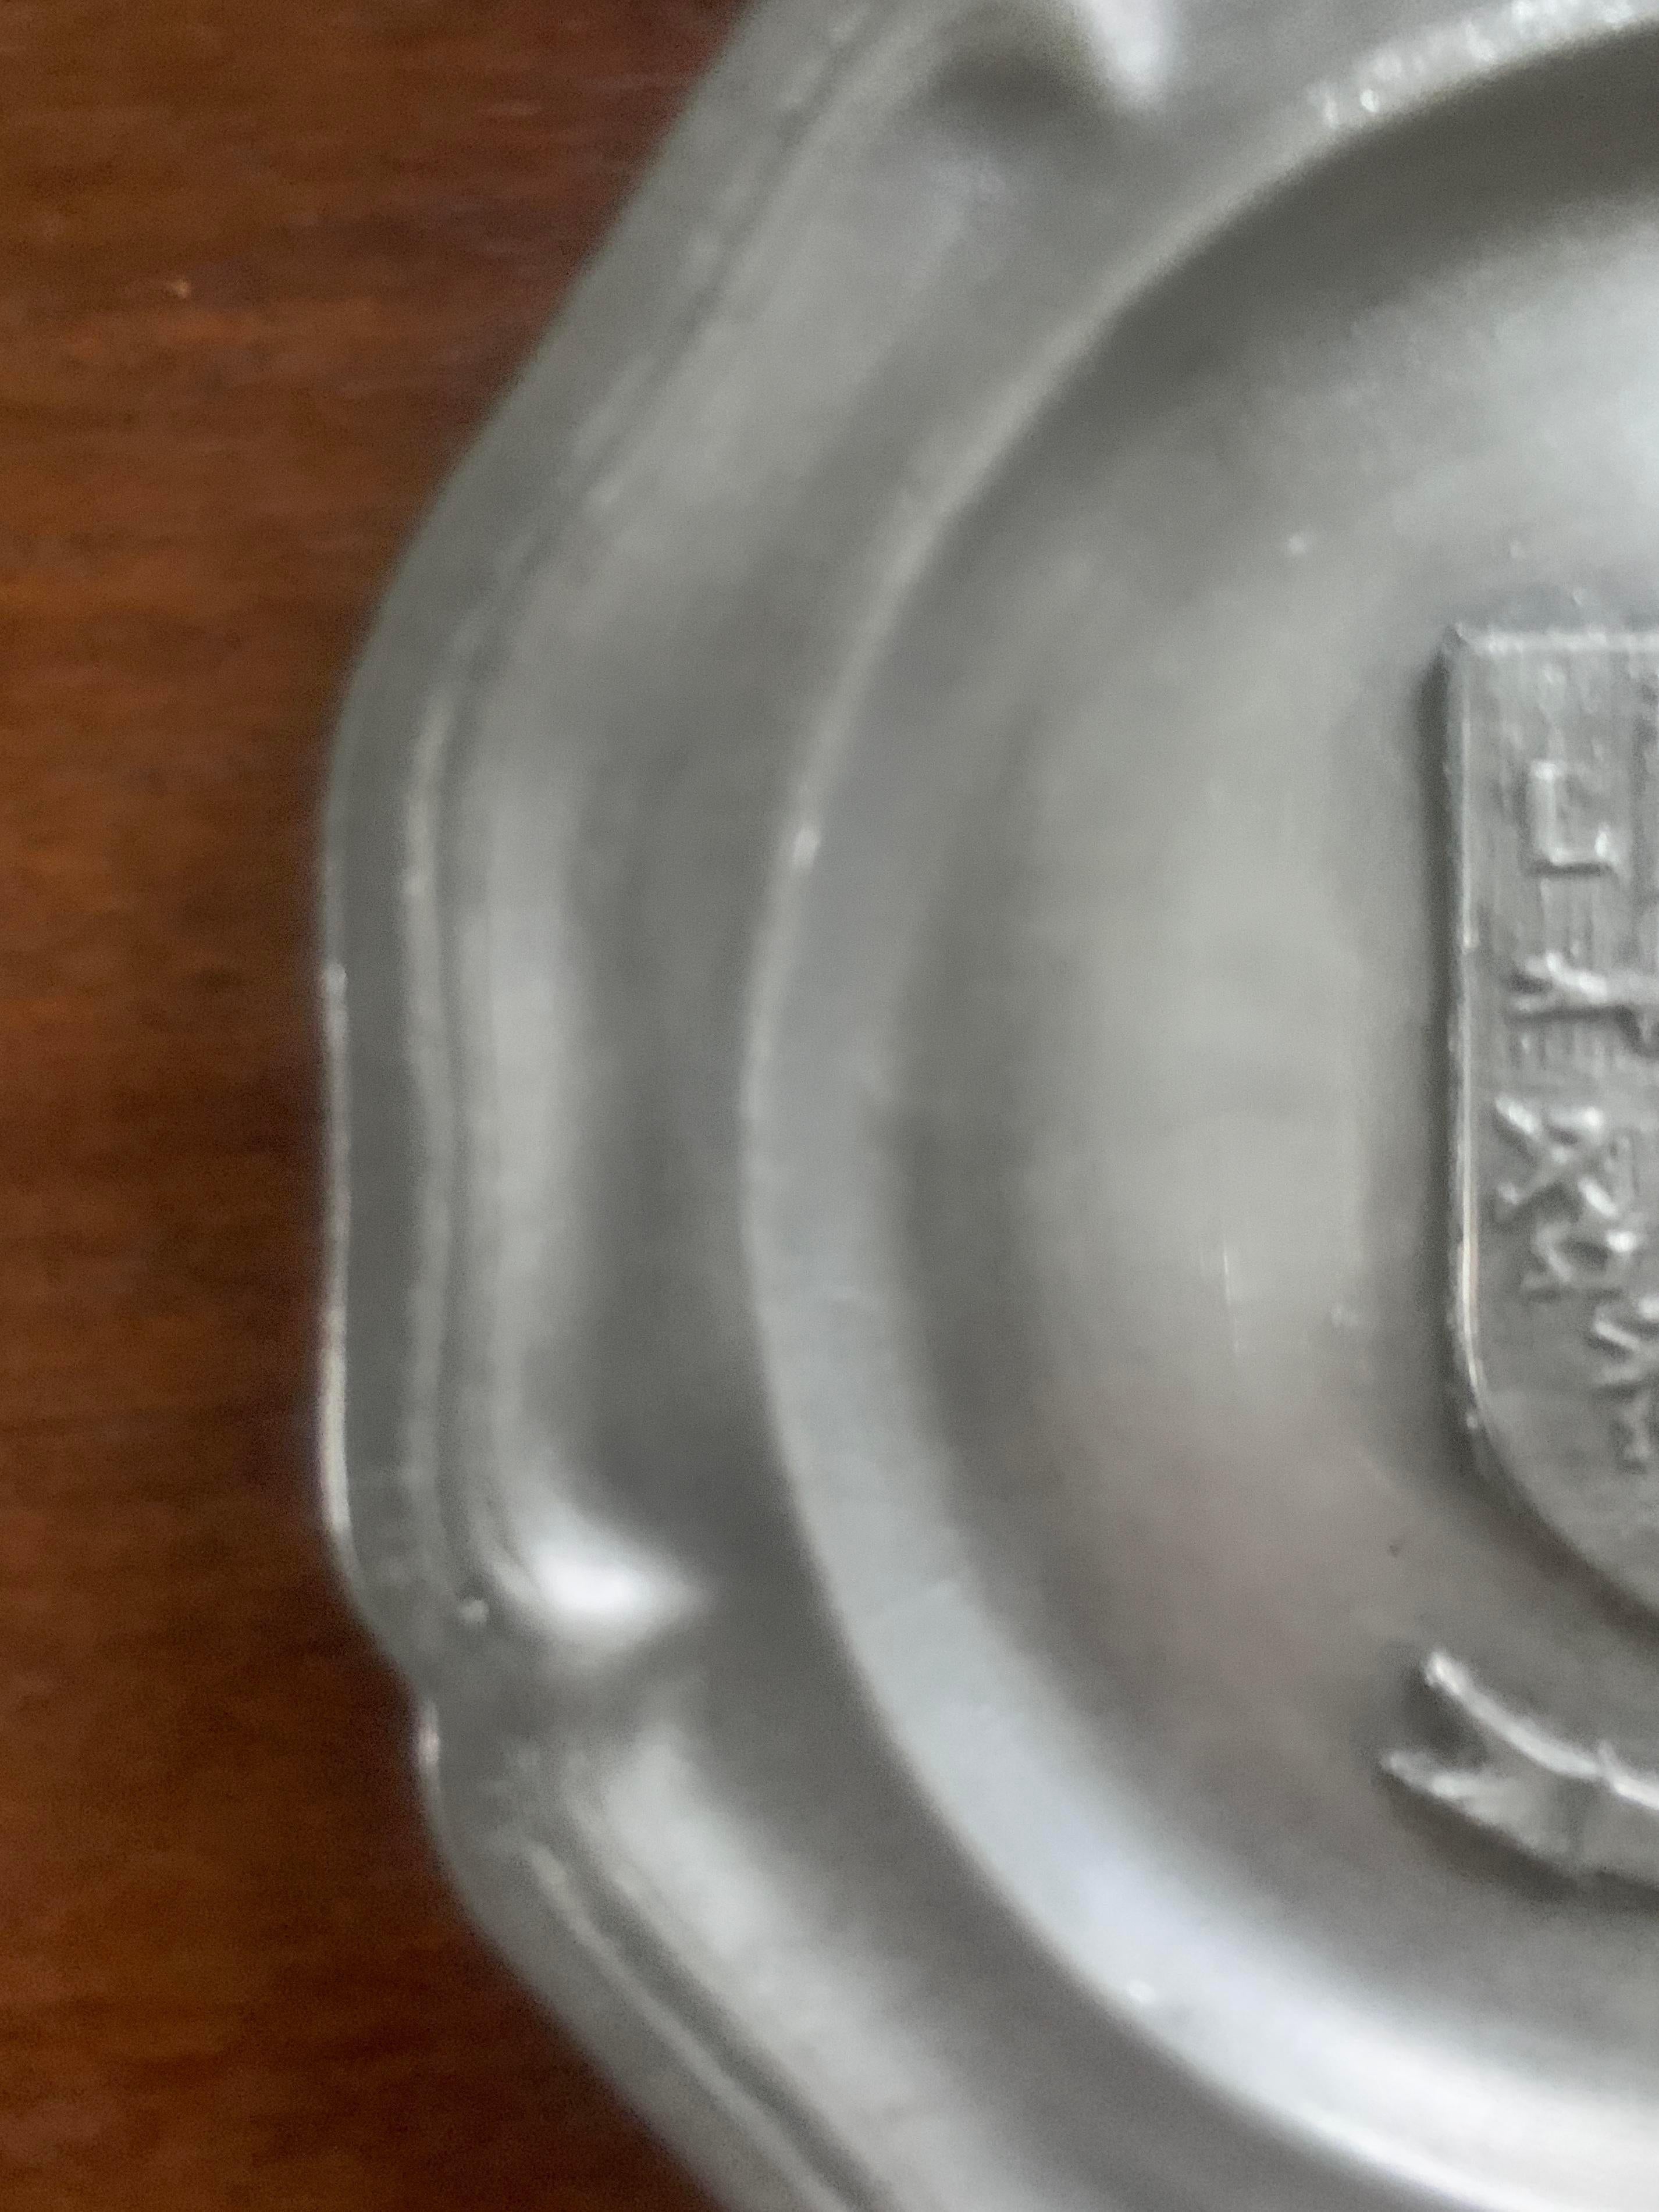 A vintage pewter wall plate featuring the coat of arms of Liege, Belgium.

Measures: 7